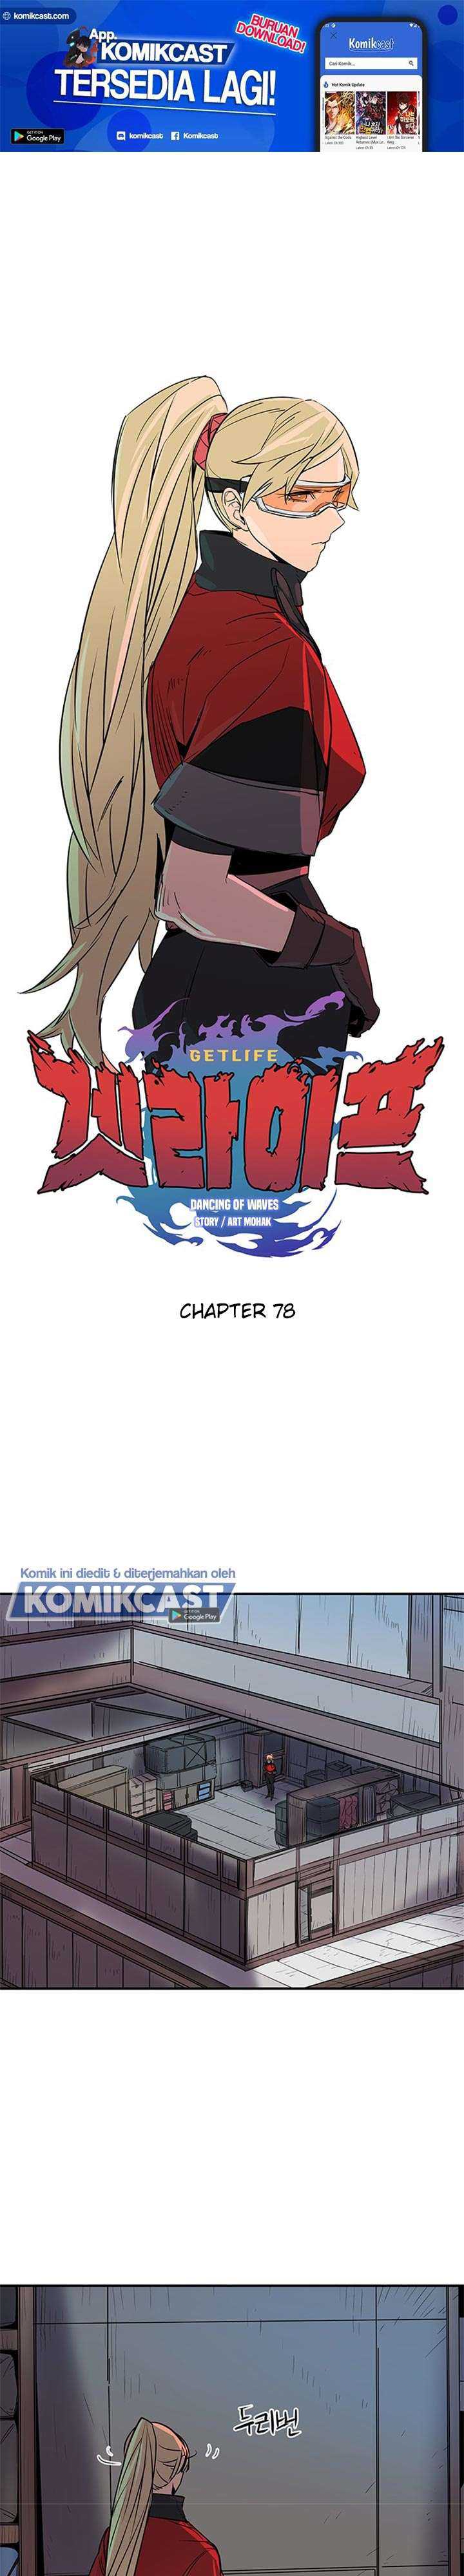 Get Life Chapter 78